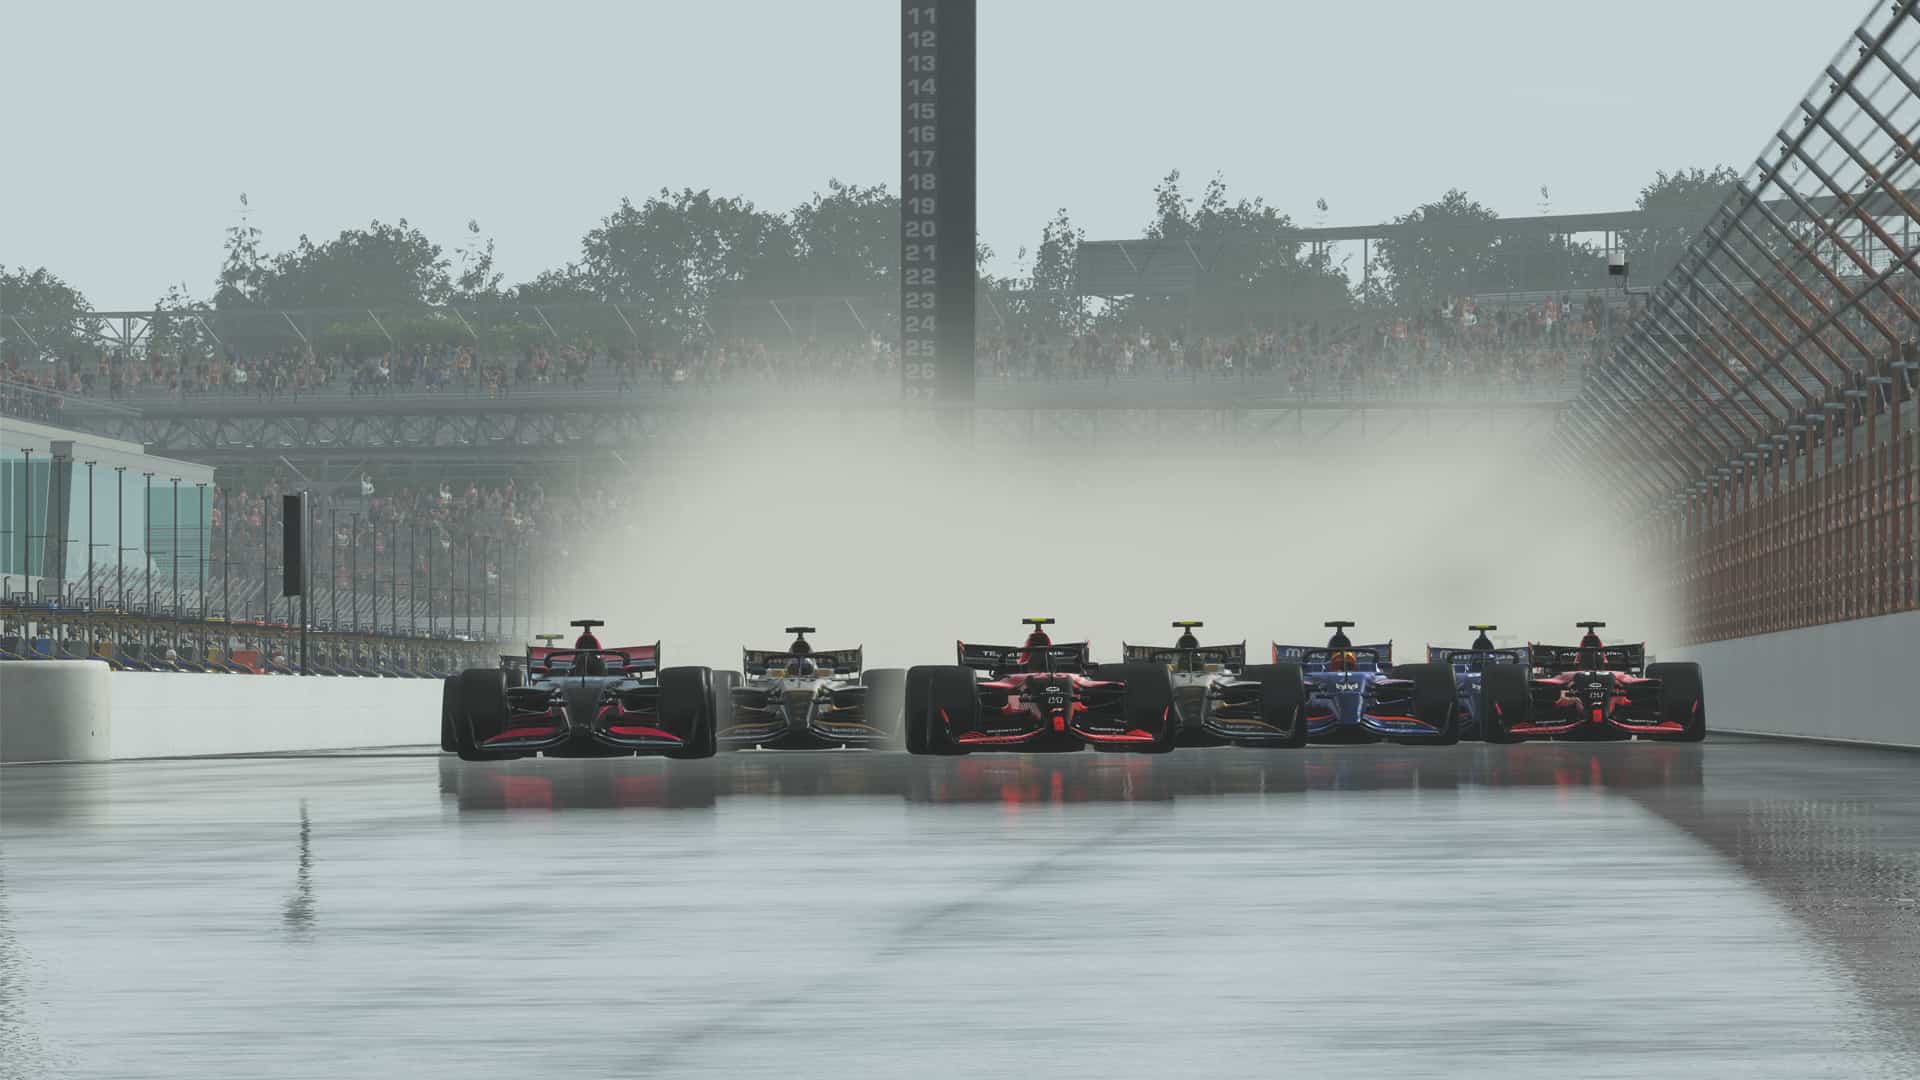 Formula Pro Series: Huis secures dramatic fourth win in wet race